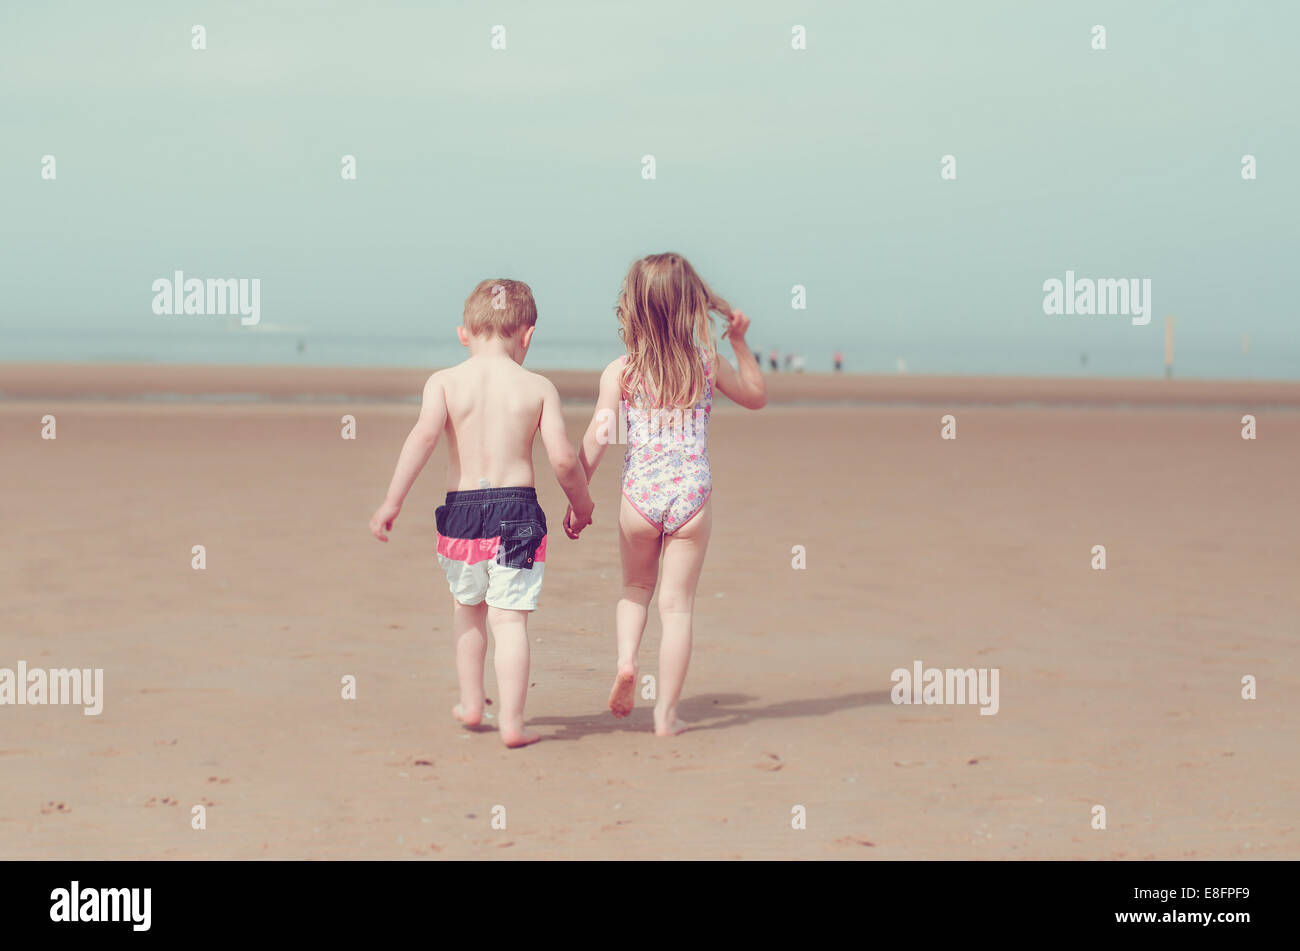 Girl and boy holding hands on beach Banque D'Images